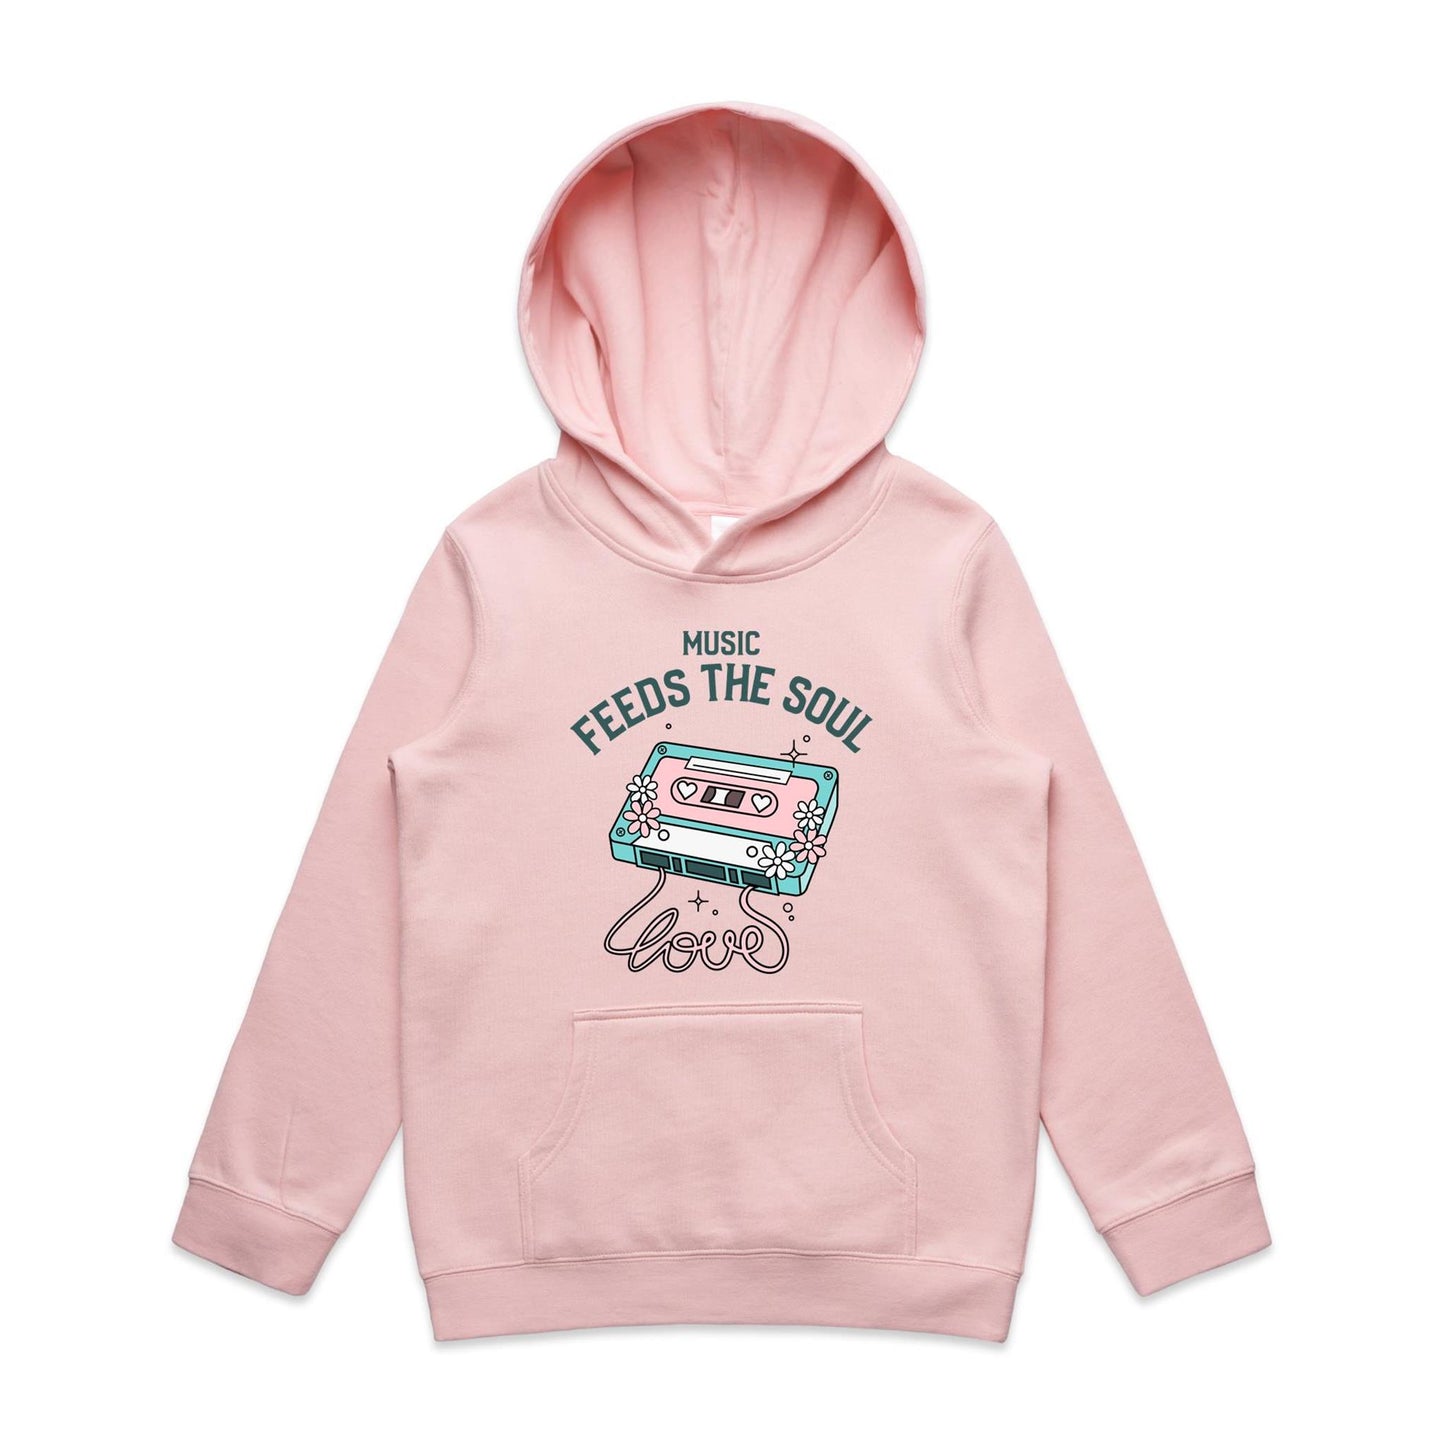 Music Feeds The Soul - Youth Supply Hood Pink Kids Hoodie Music